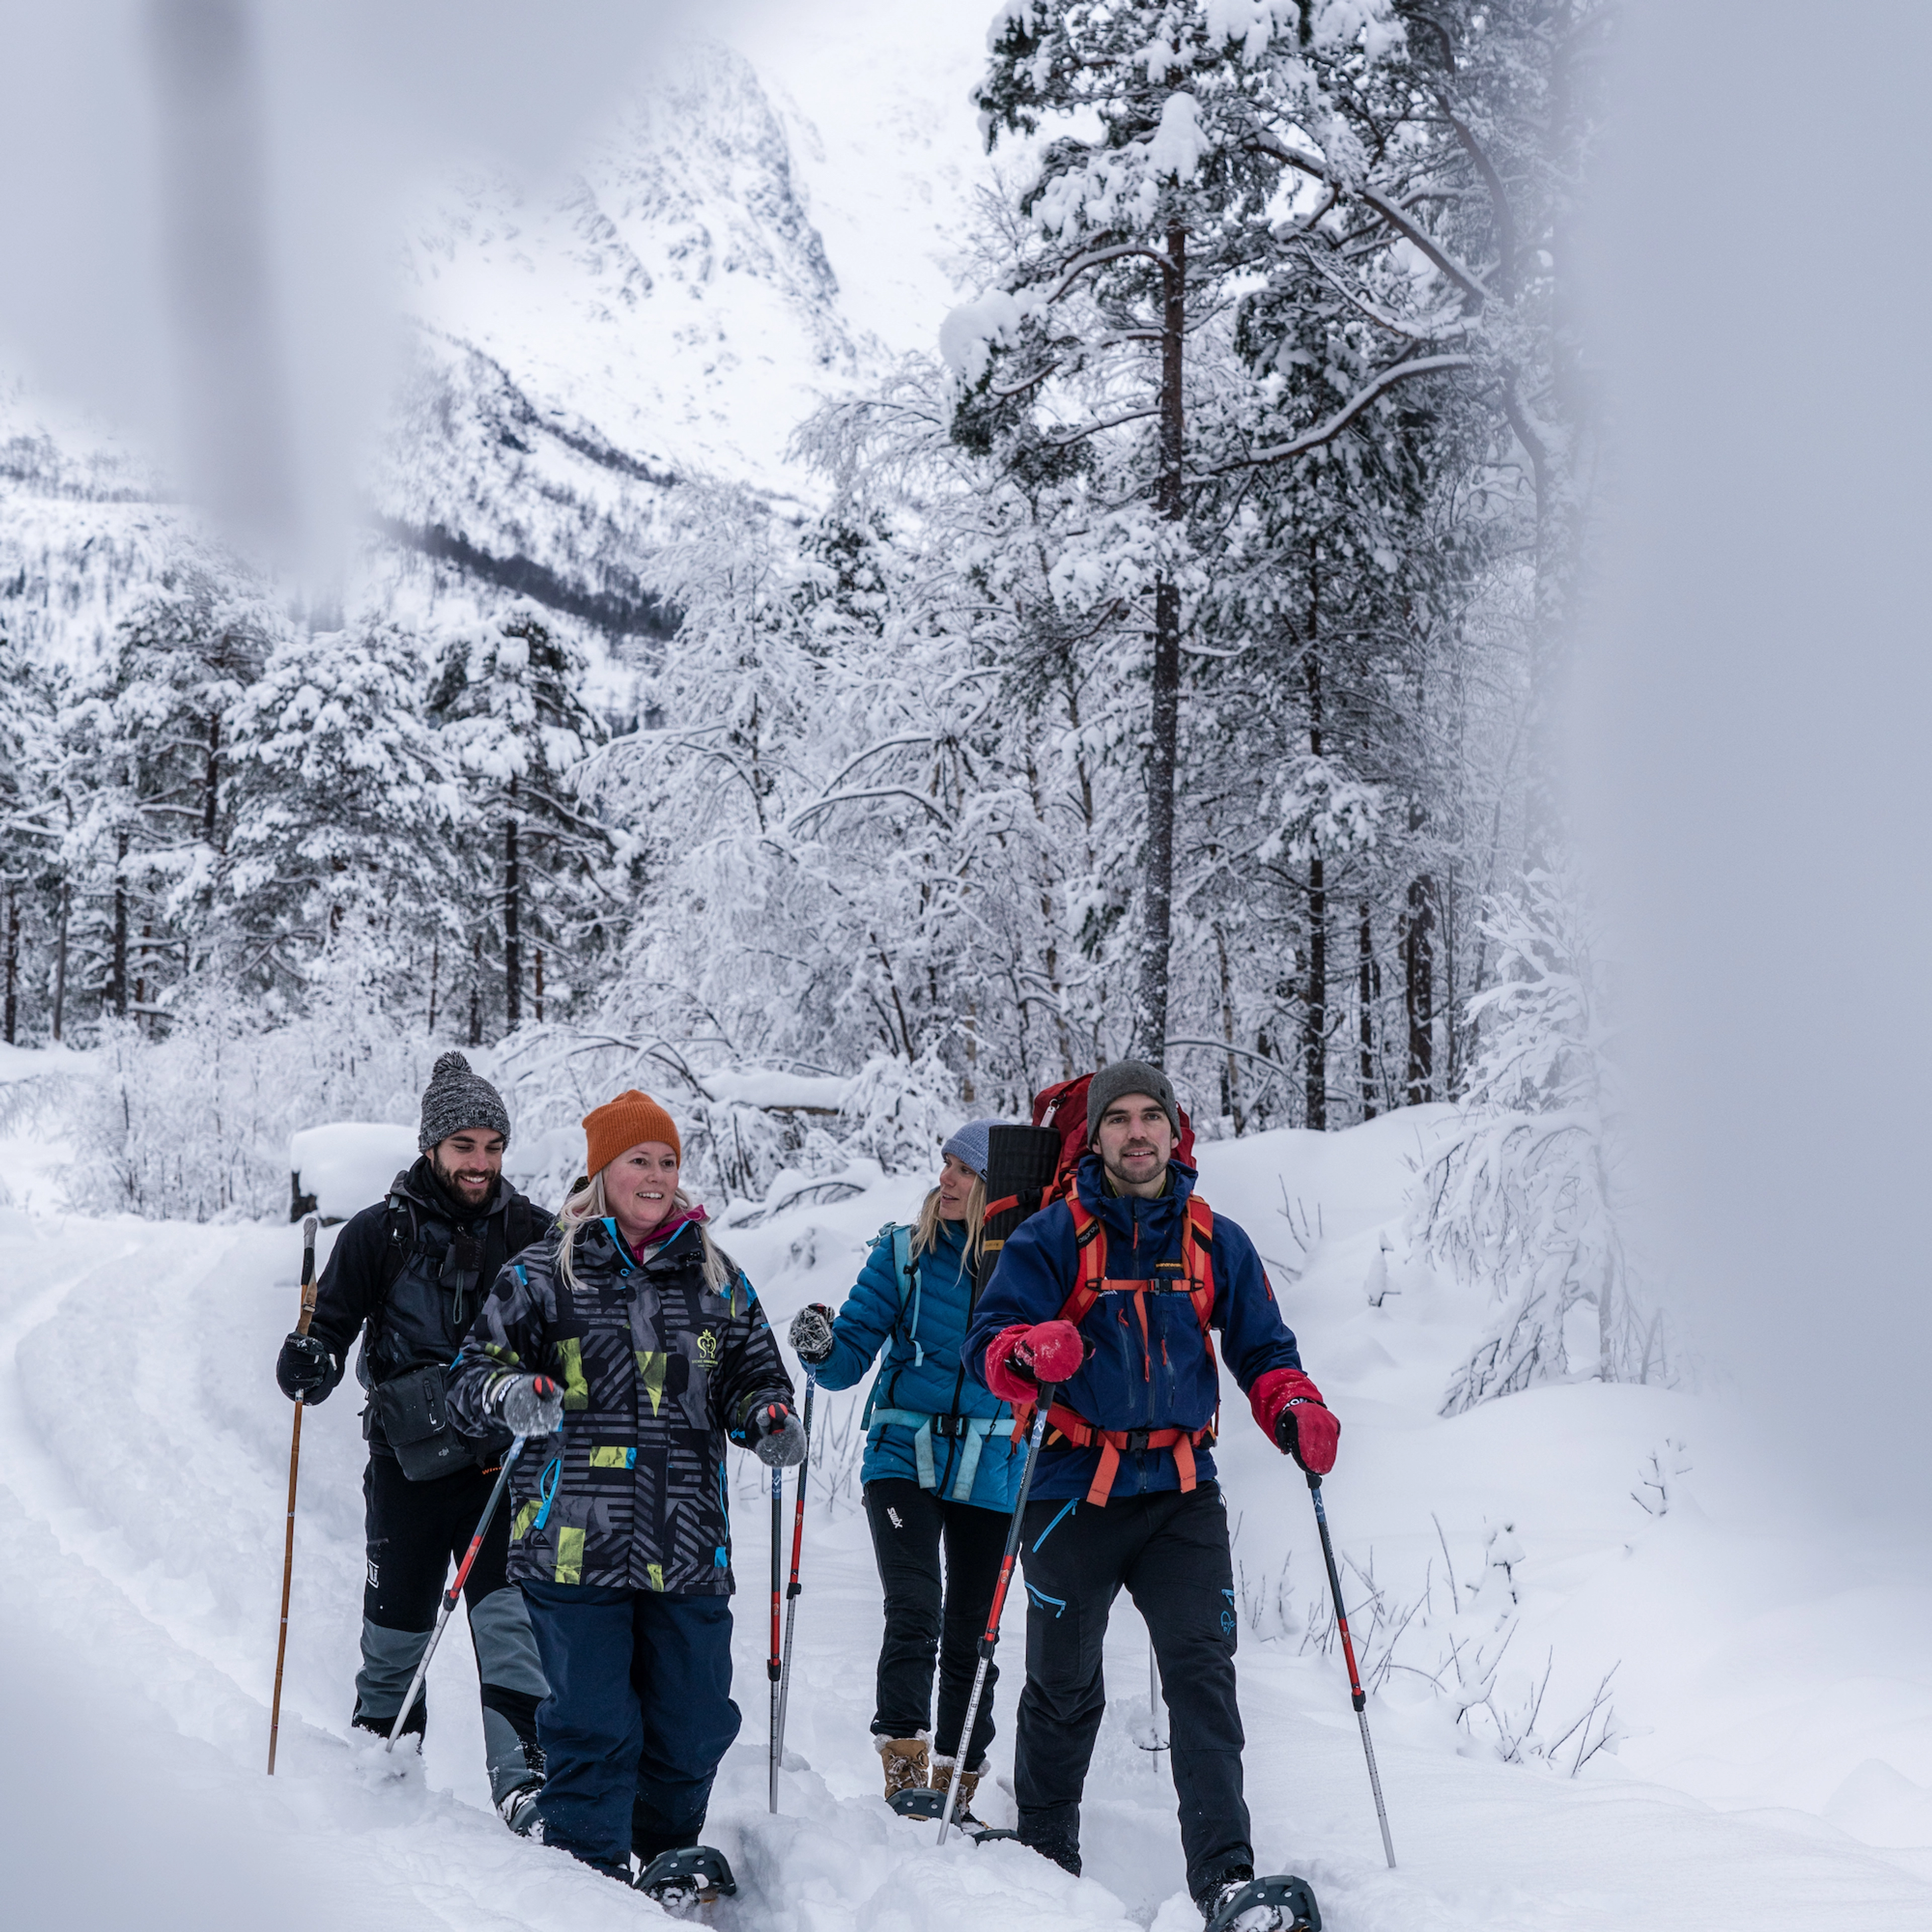 Snowshoe hike in Raunadalen, Voss, Norway - things to do in Voss